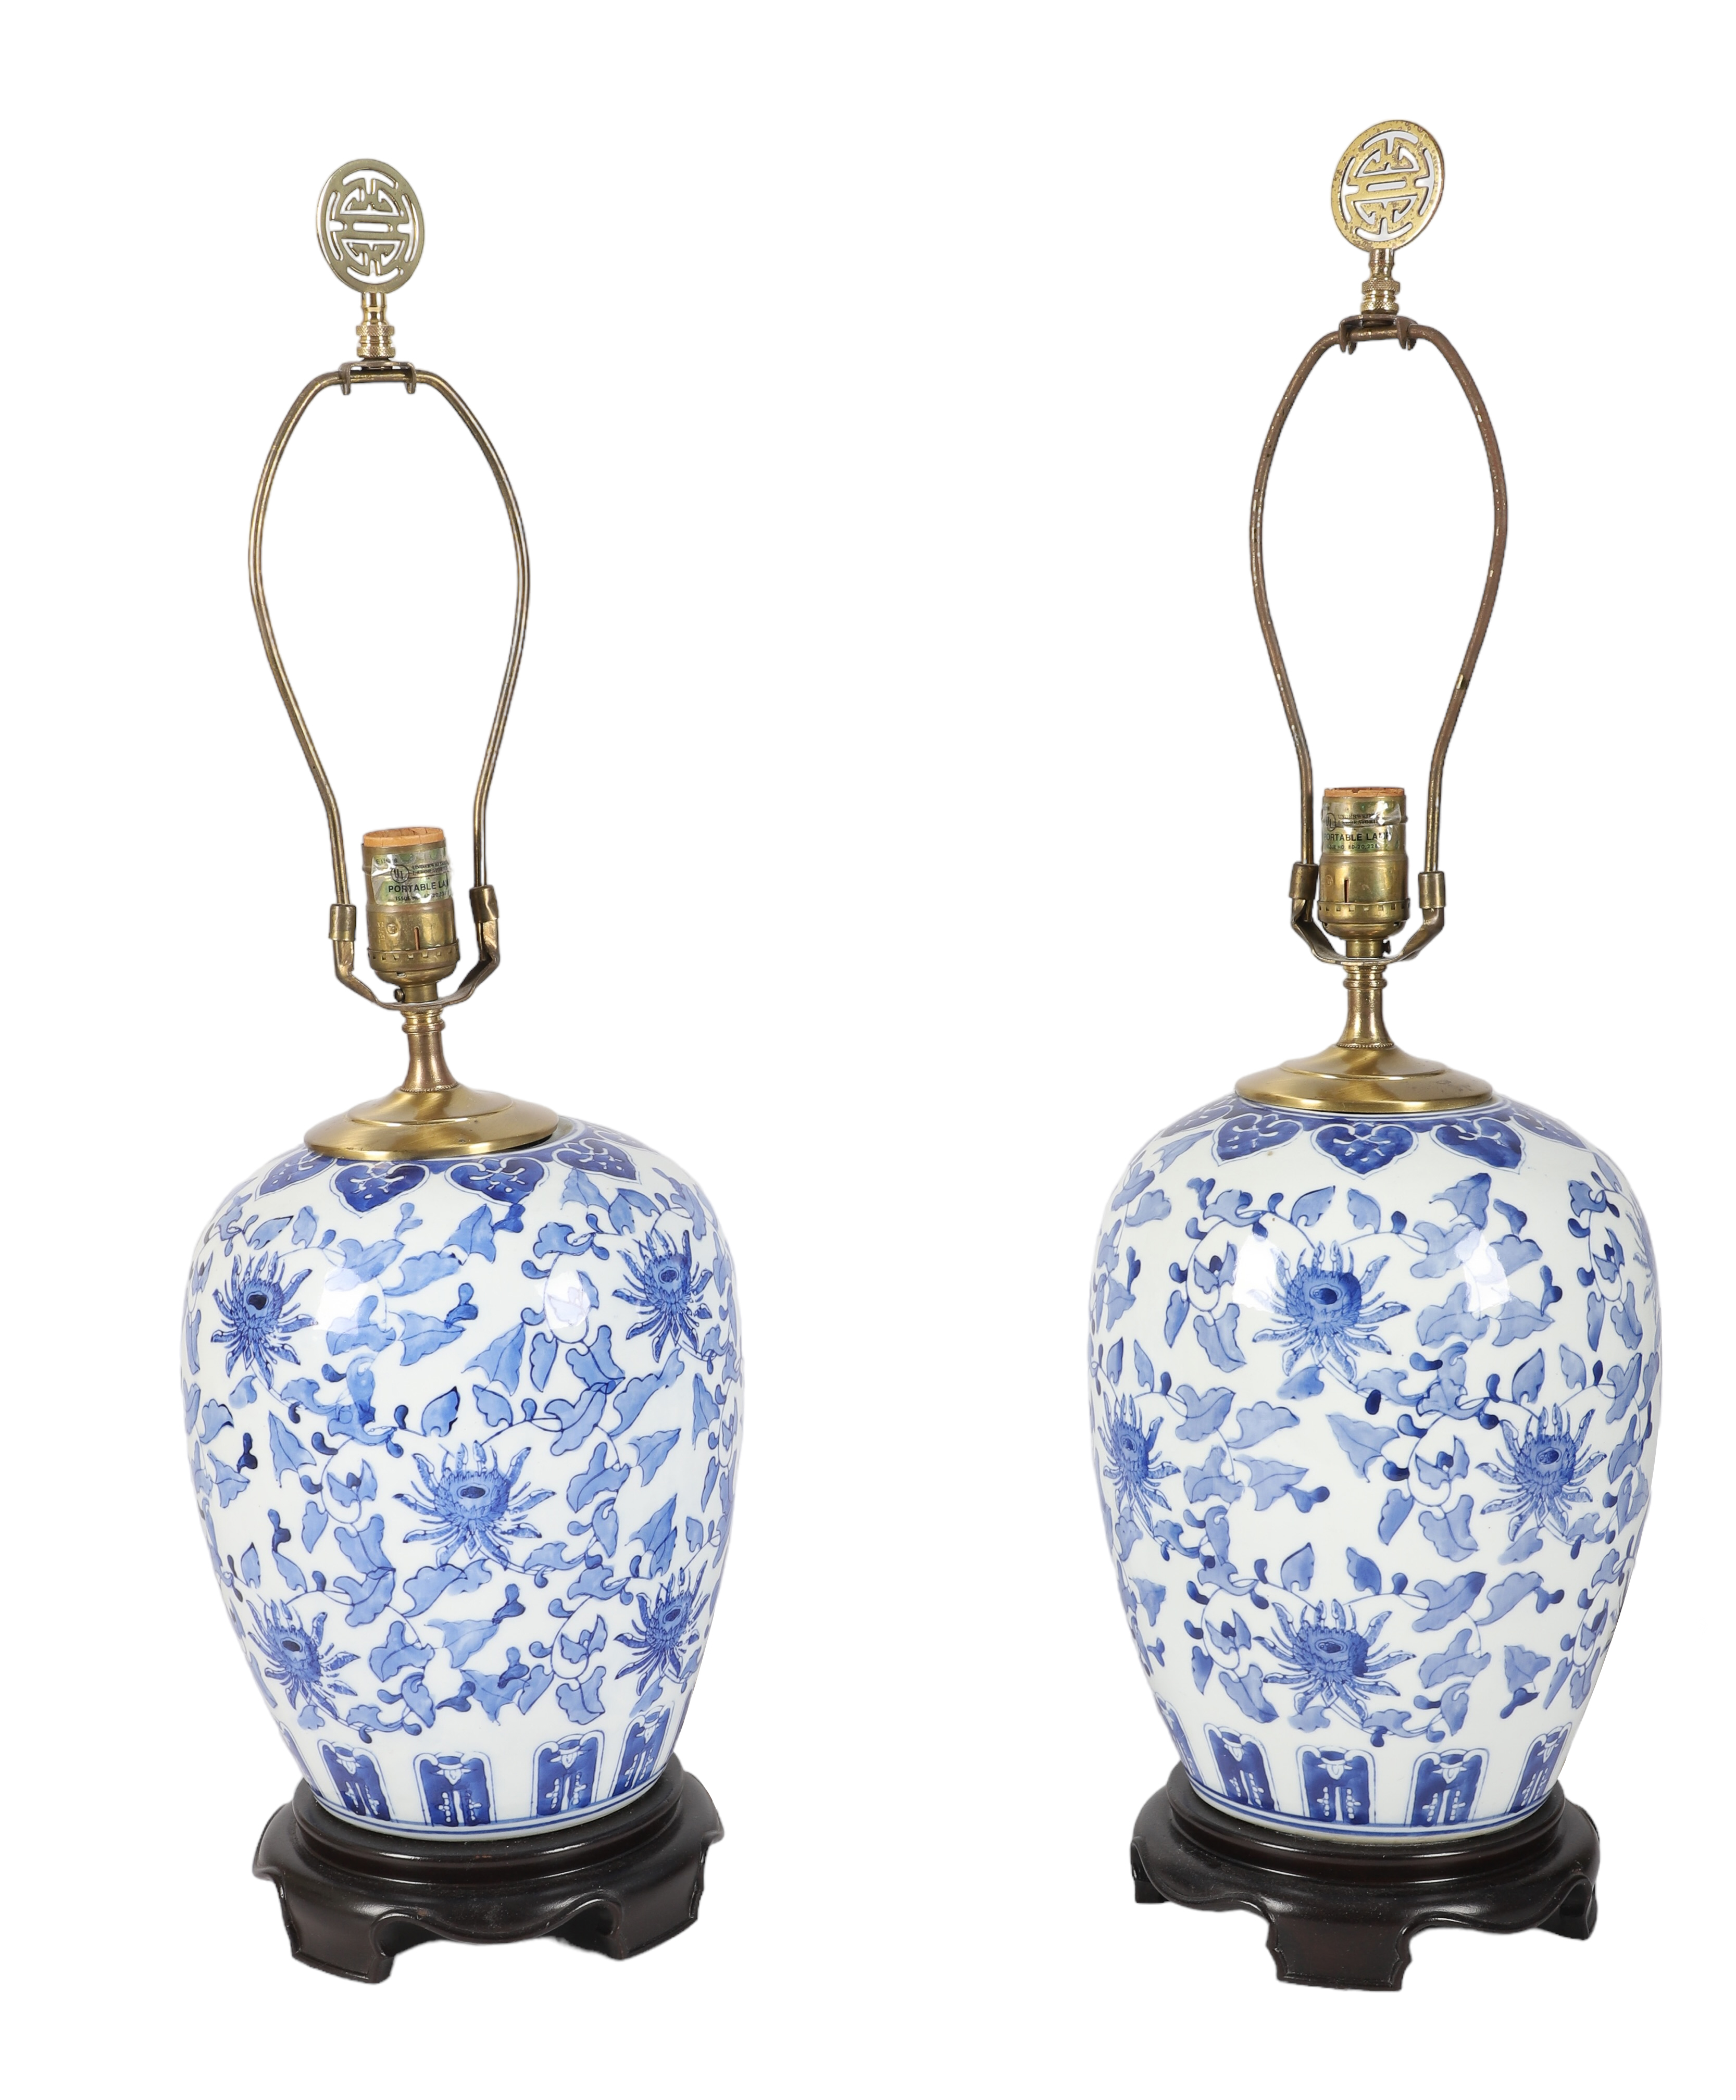 Pair of Chinese blue & white porcelain